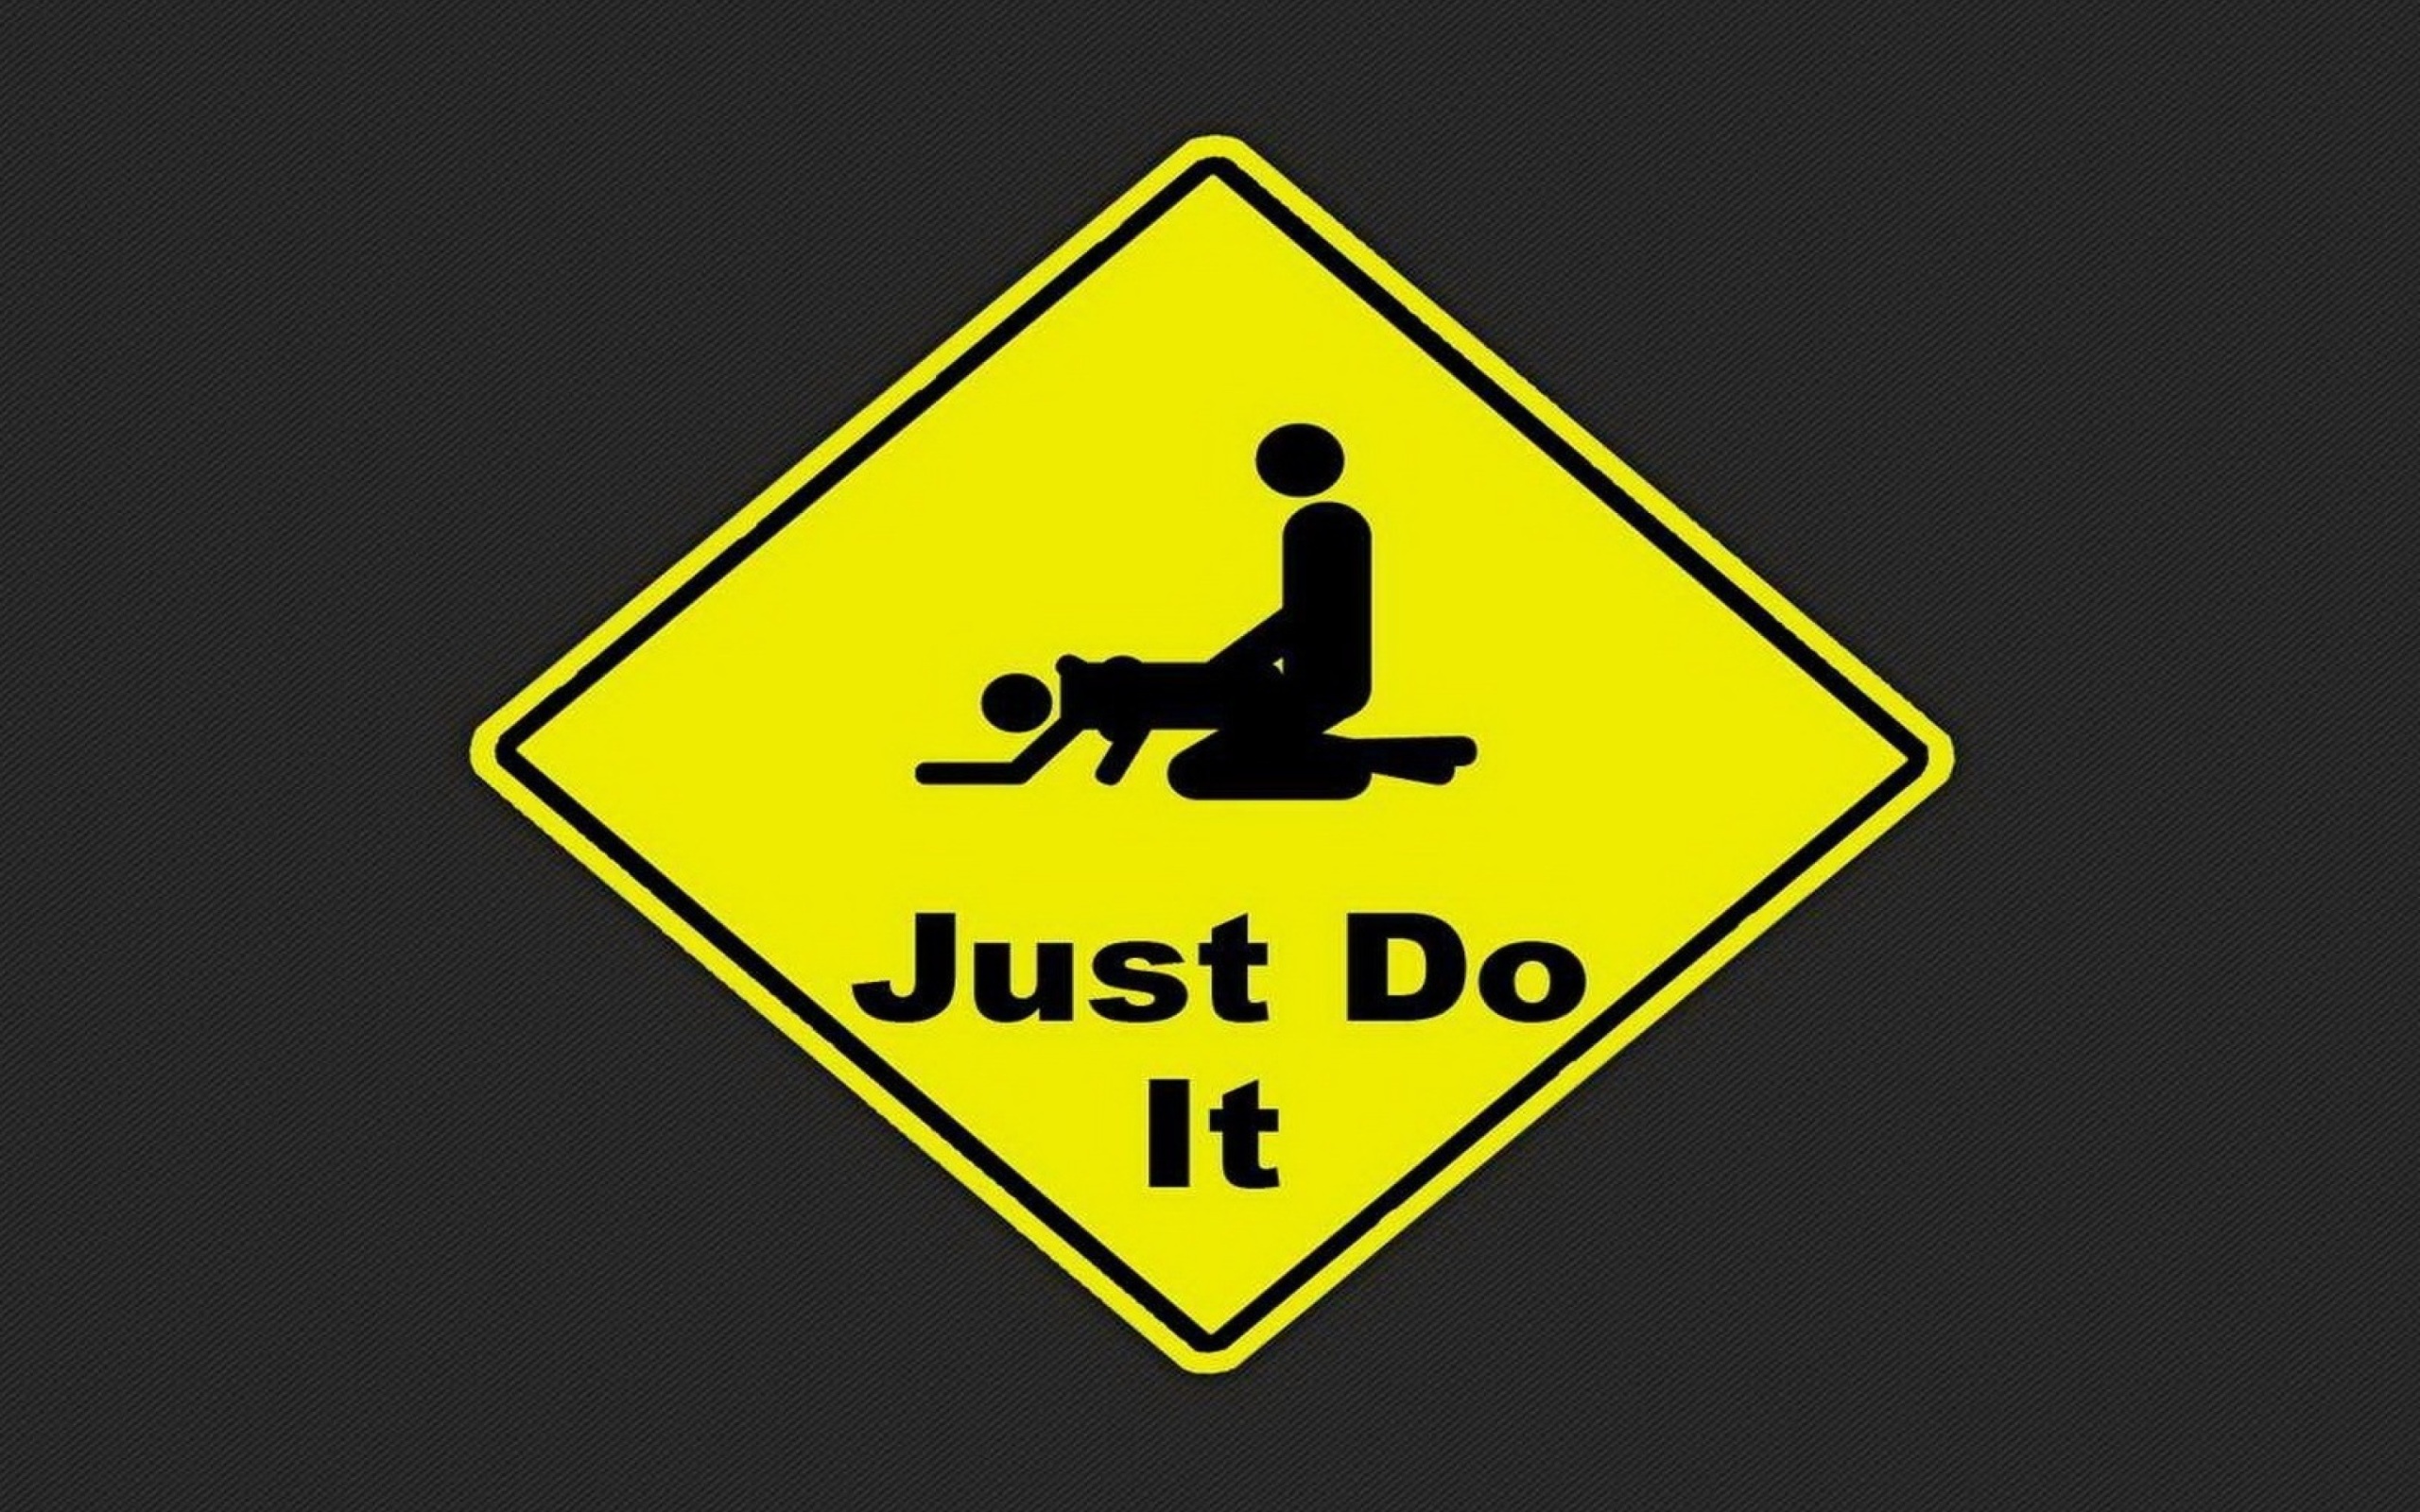 Just Do It Funny Sign screenshot #1 2560x1600